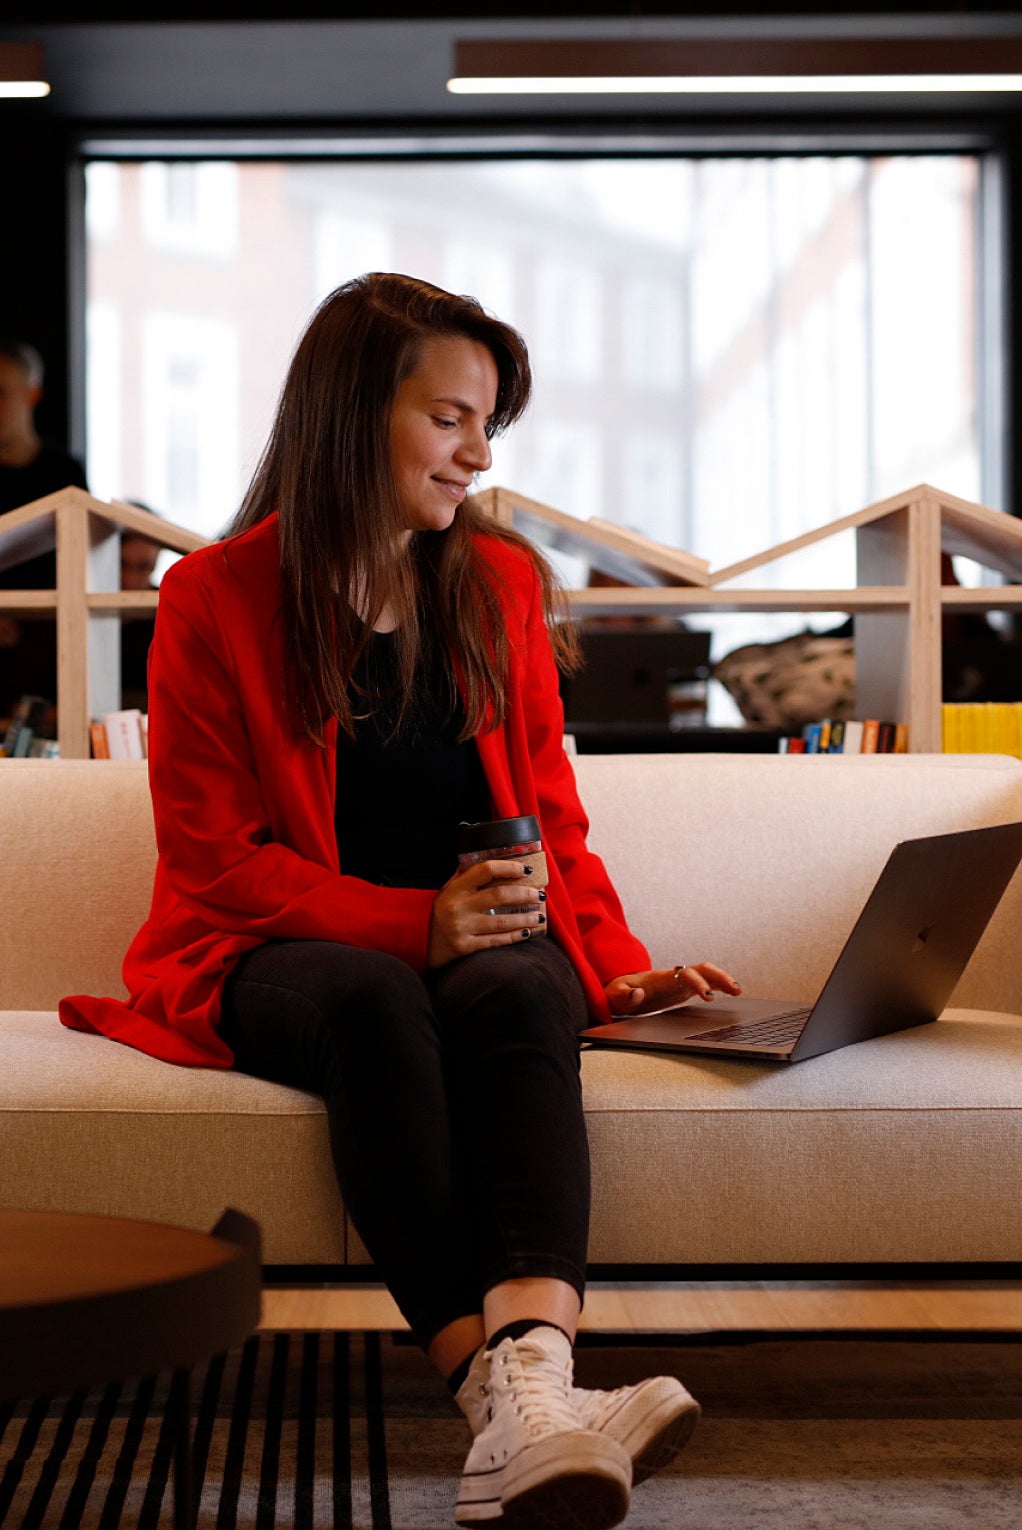 An individual in a bright red jacket is sitting down on a modern couch while they work on their laptop with one hand and hold a coffee cup in the other.